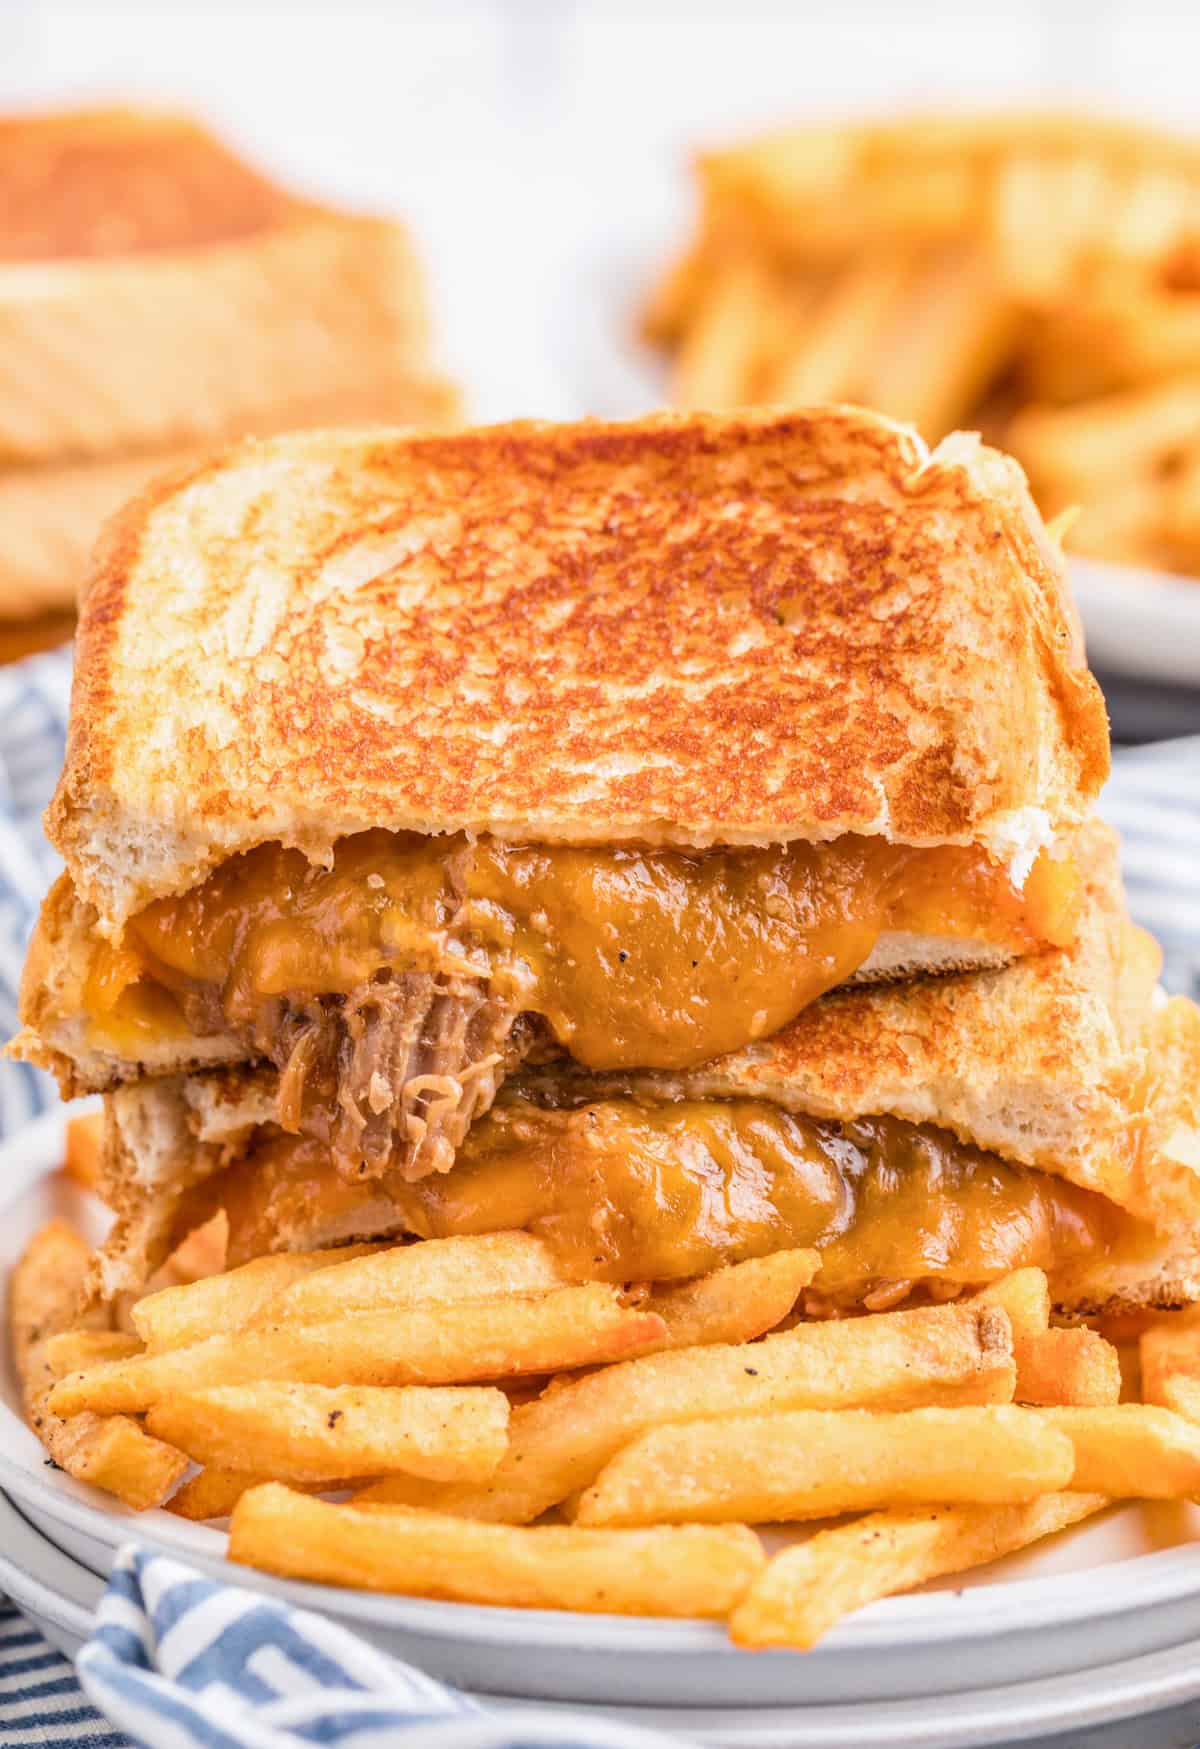 BBQ Pulled Pork Grilled Cheese cut in half showing melty cheese on top of a plate of french fries.